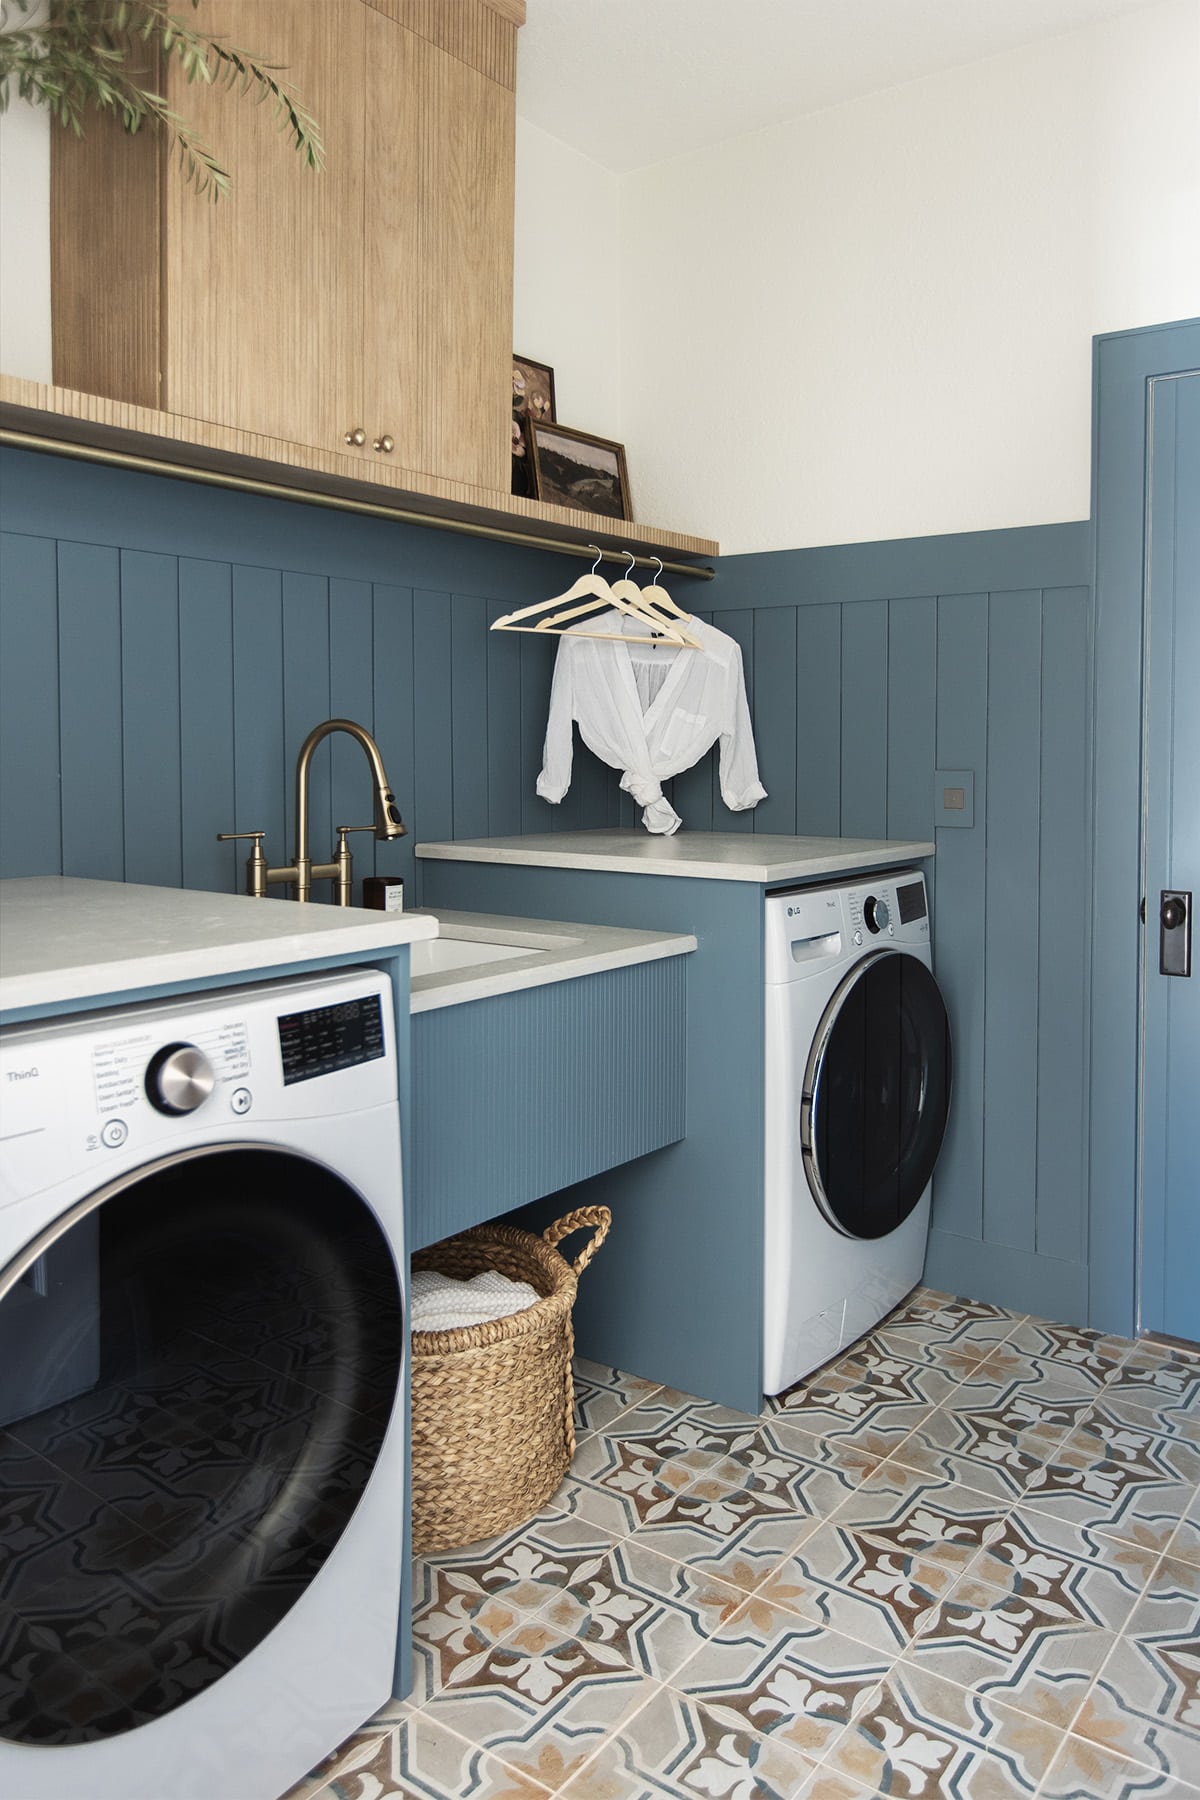 laundry room with sherwin williams blustery sky walls, quartz countertops, pole wrap shelf and hanging rod